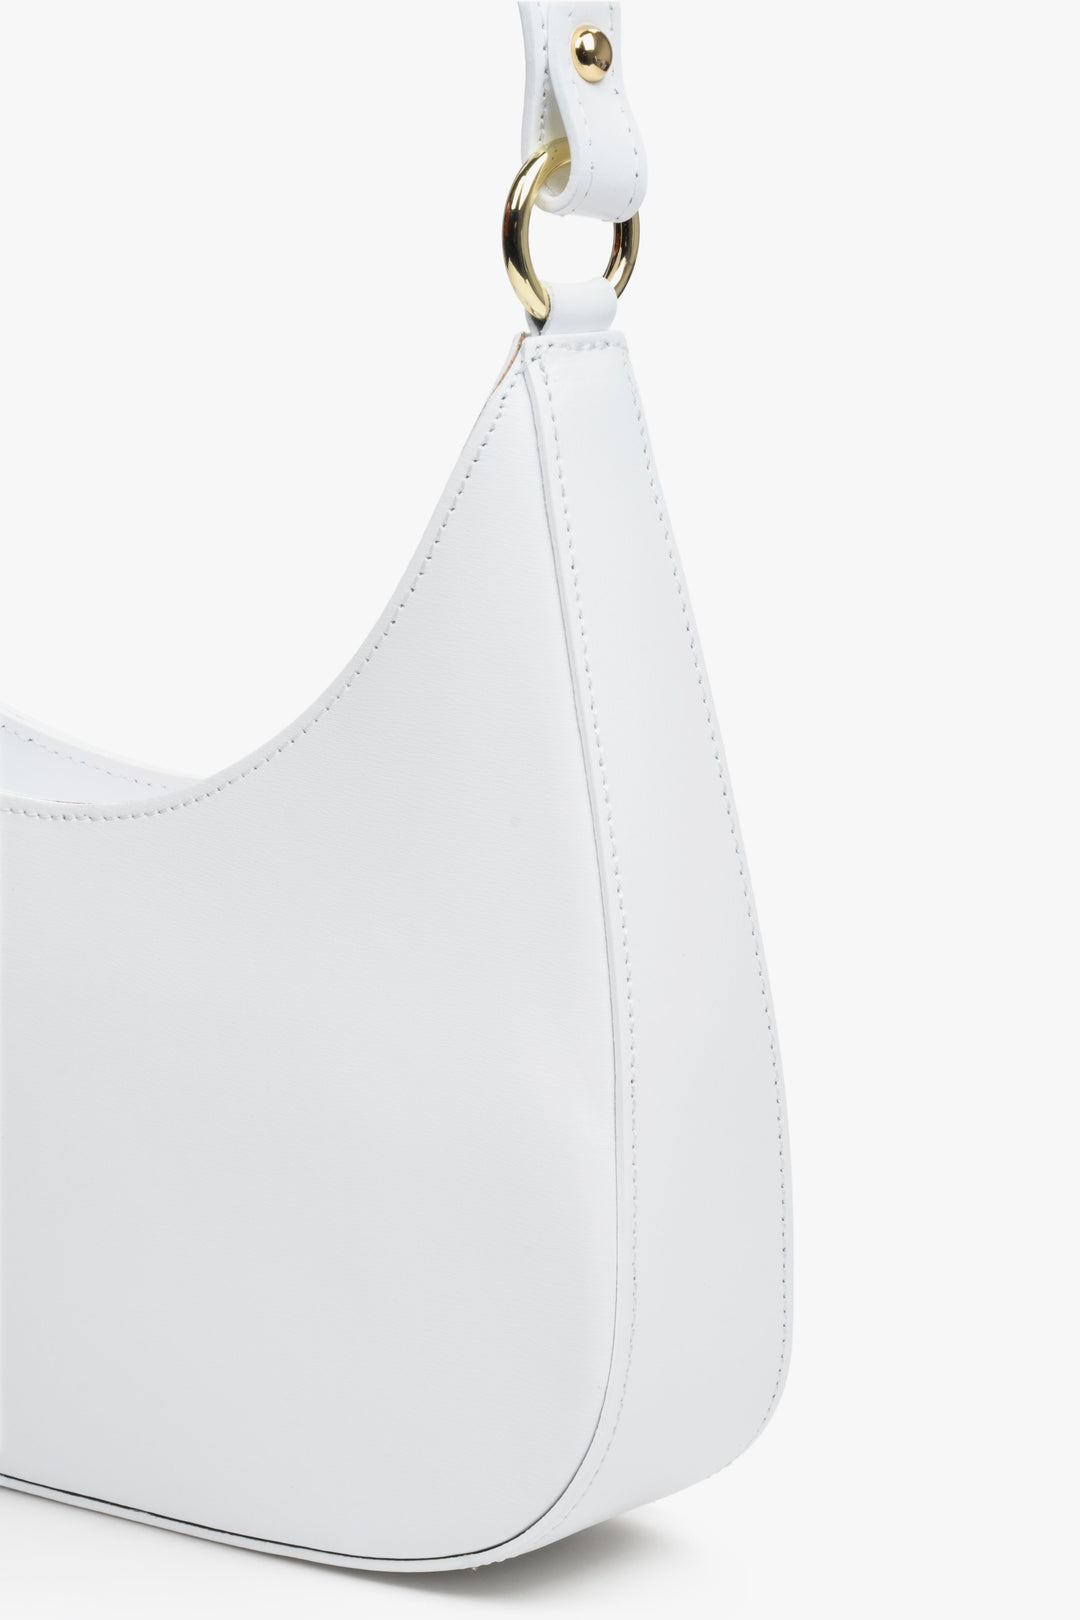 Women's Italian natural leather shoulder bag in white.